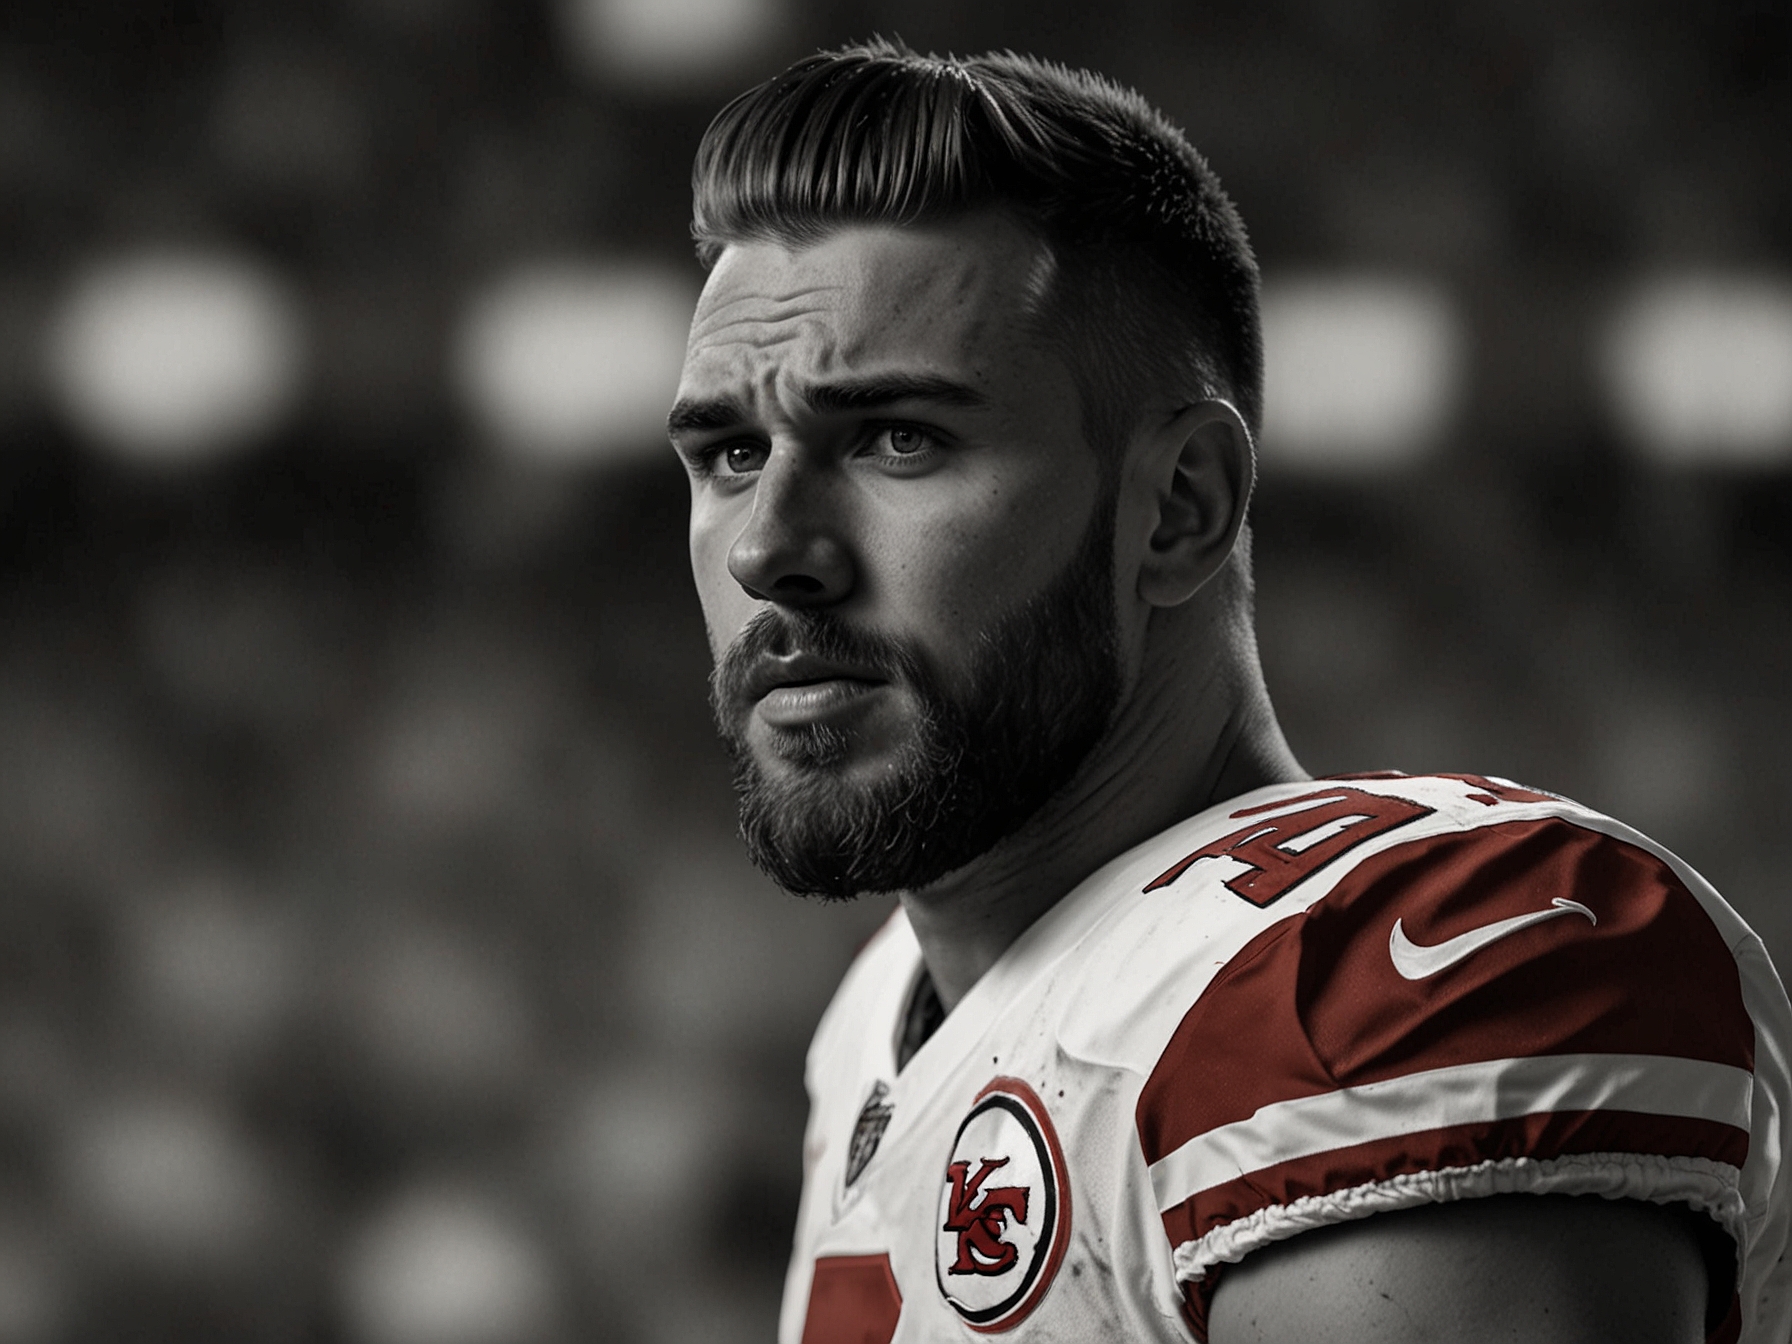 Travis Kelce on the field during a Kansas City Chiefs game, showcasing his skills and composure, embodying the high emotional intelligence discussed in the article.